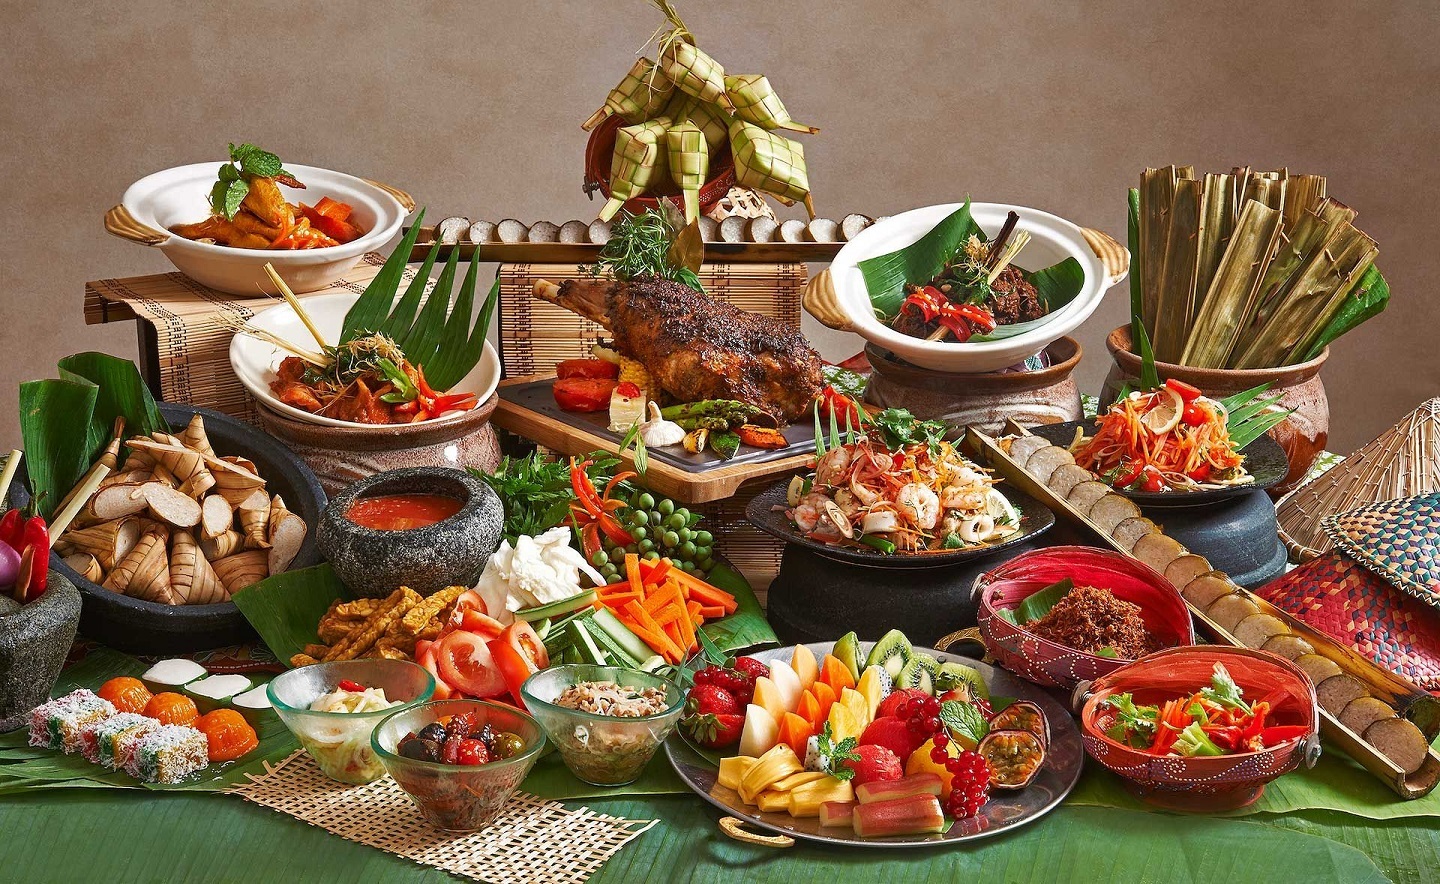 5 hotel buffets in KL to try this Ramadan | Options, The Edge